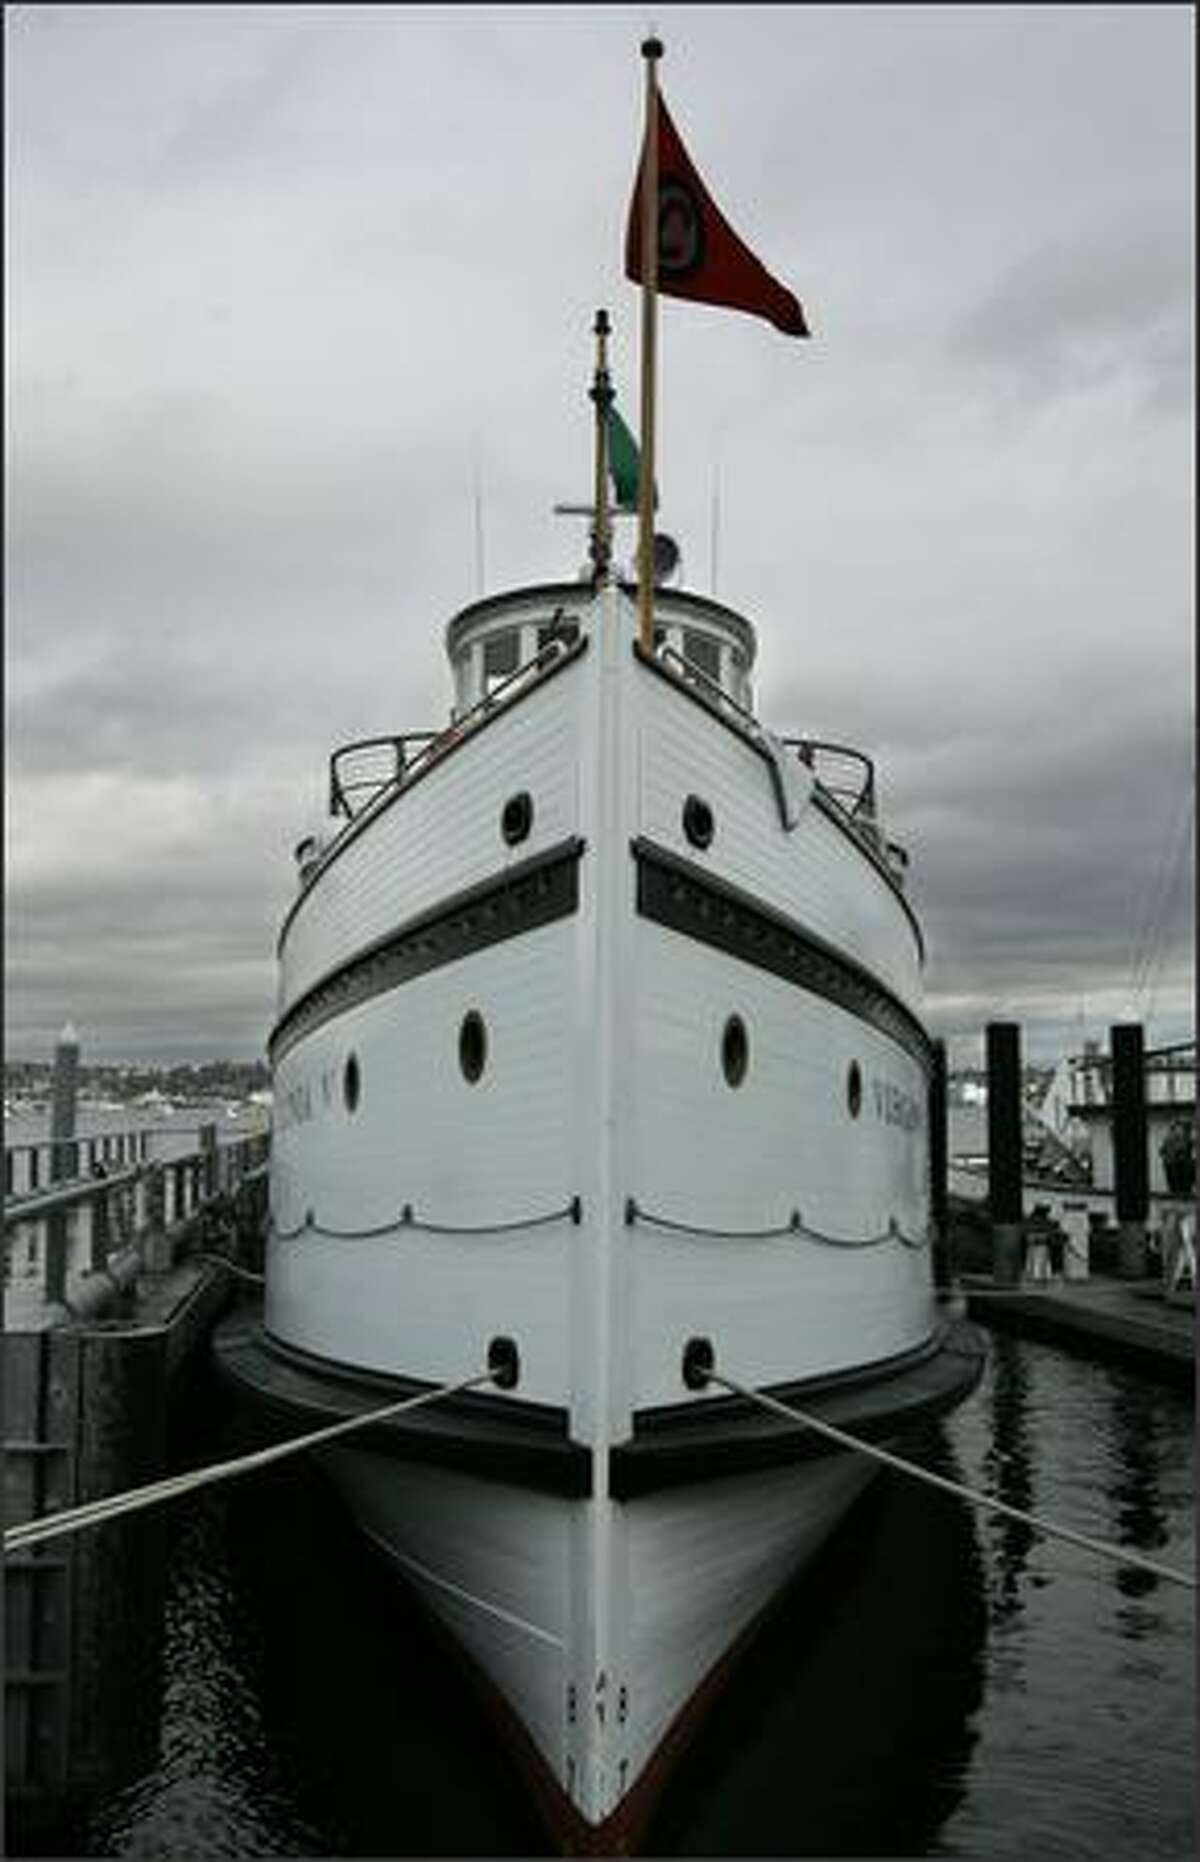 The passenger freighter Virginia V, built in 1922, sits docked at the Classic Workboat Show.